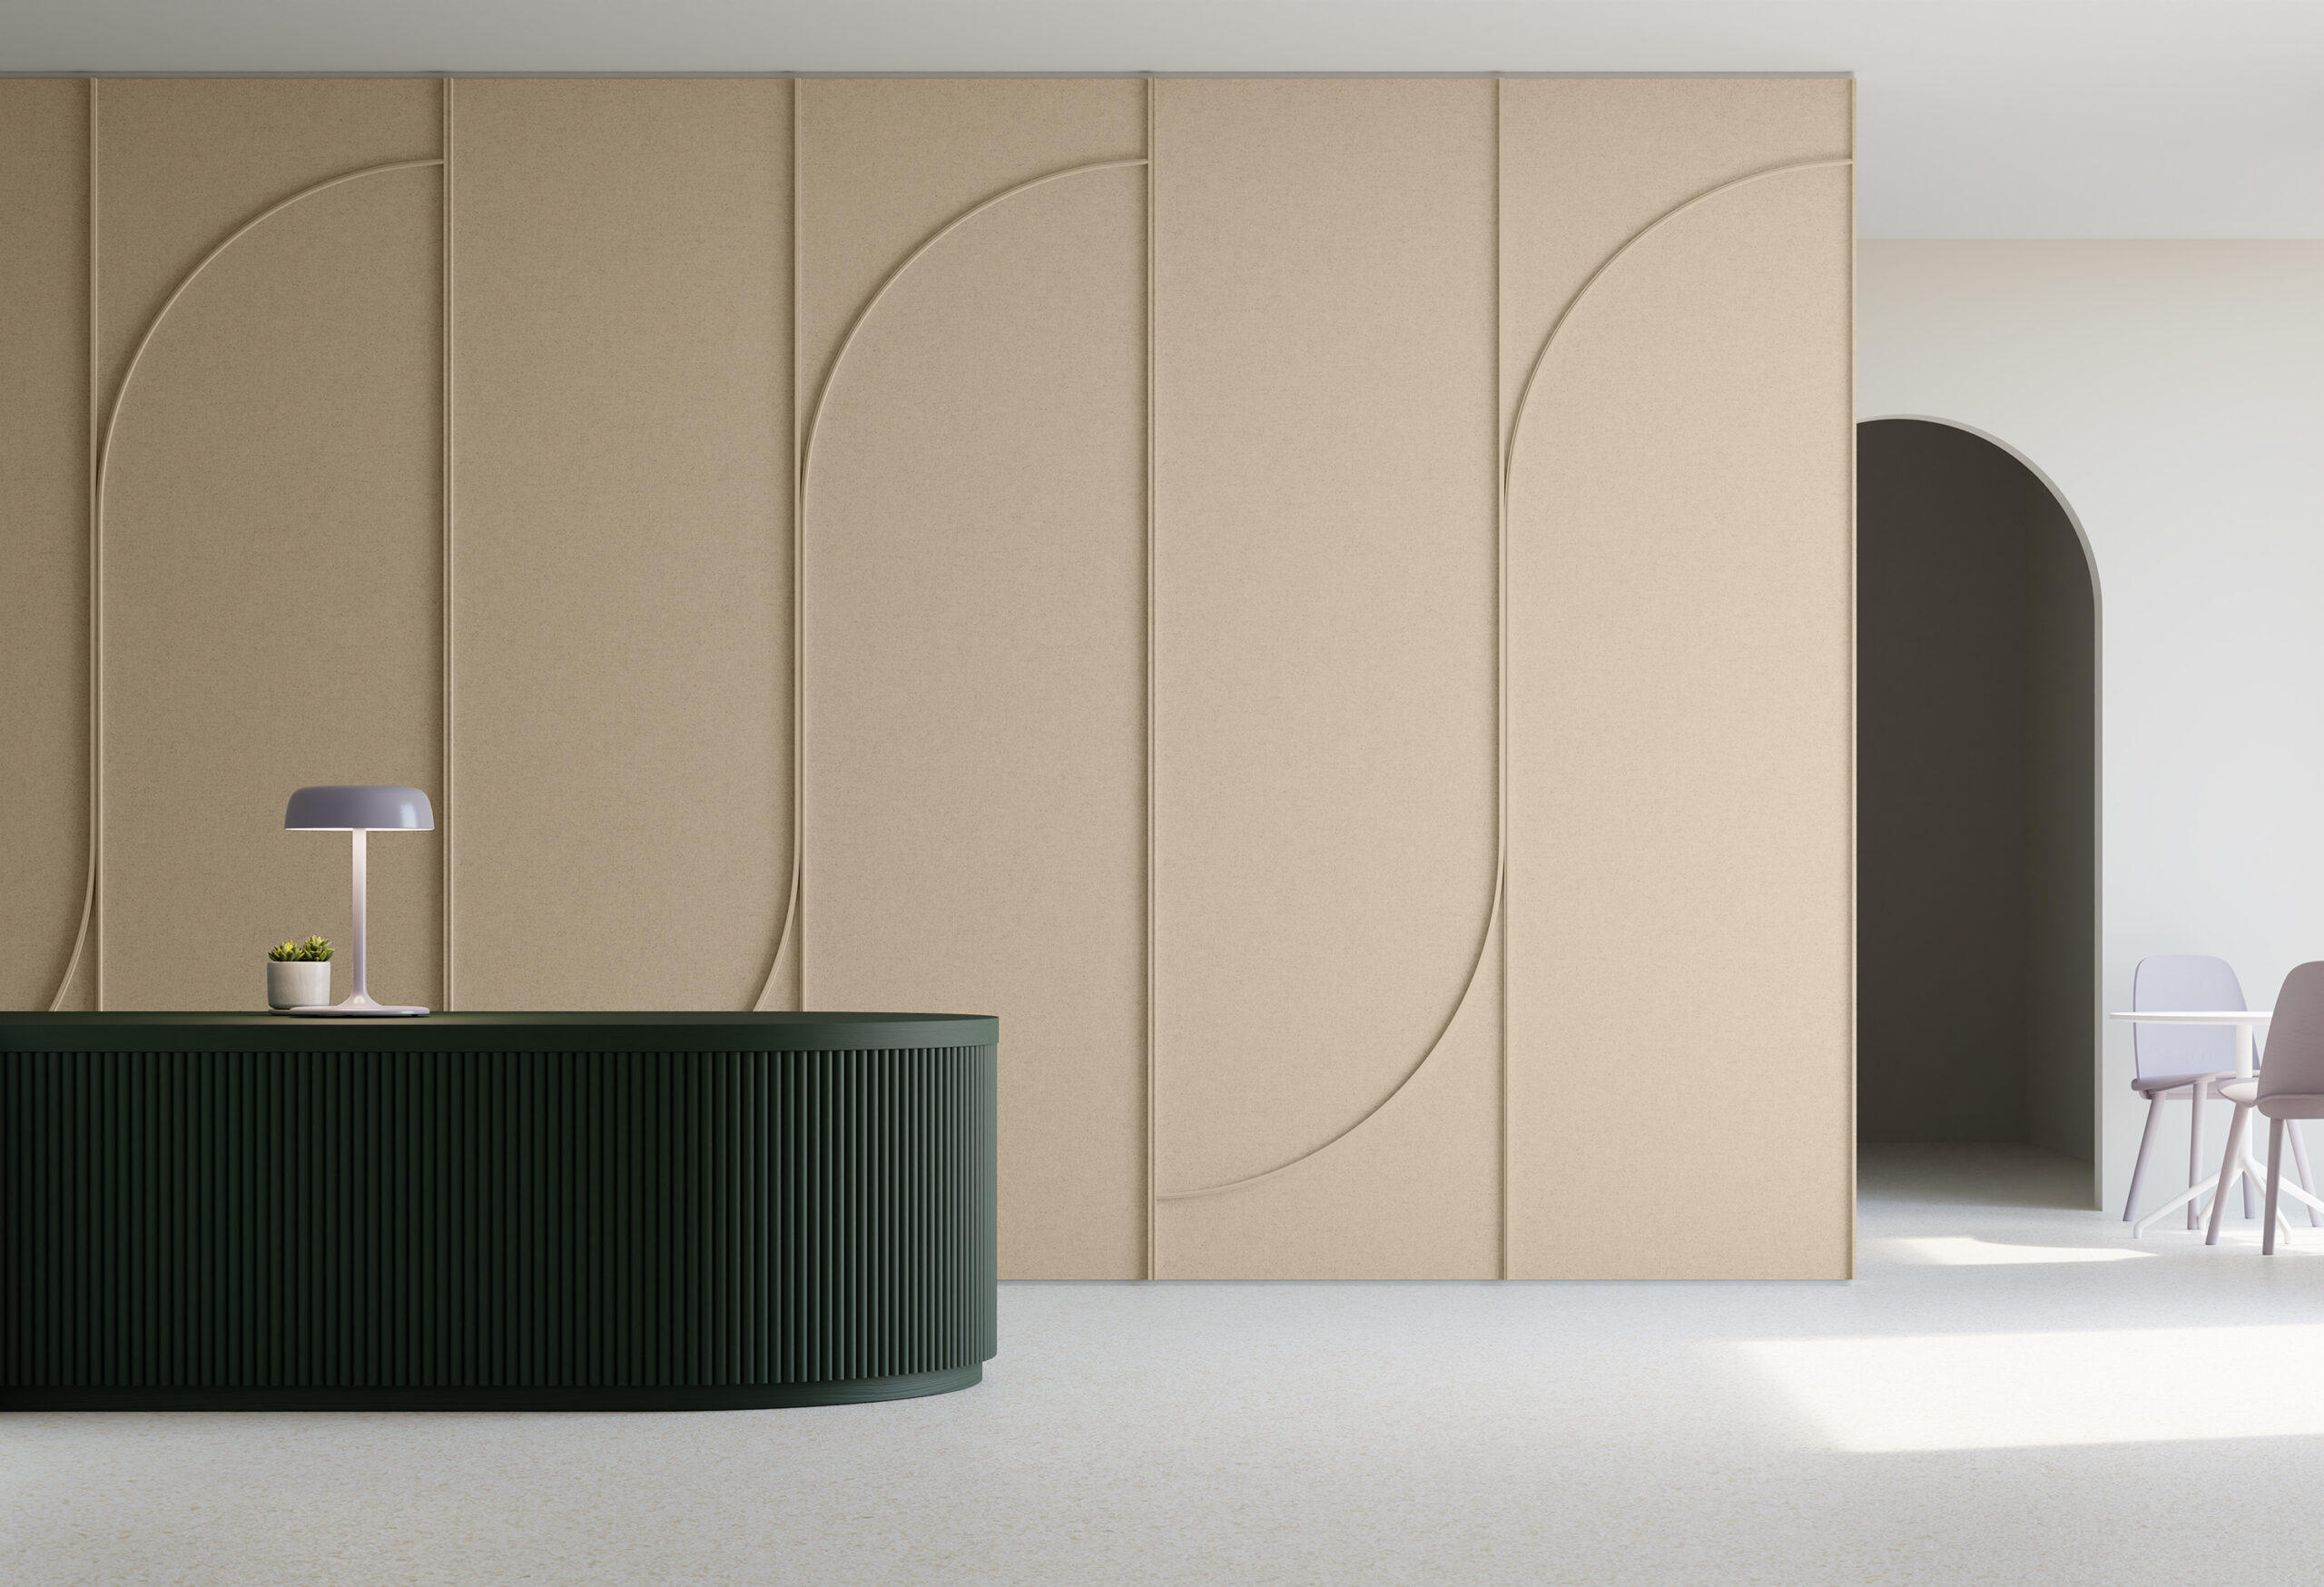 A wall covered in acoustic felt in a tan color with vertical lines and a single soft curve per panel. There is a reception desk at the left with a plant and purple lamp, and at the right, an arched doorway and a small table and chair.